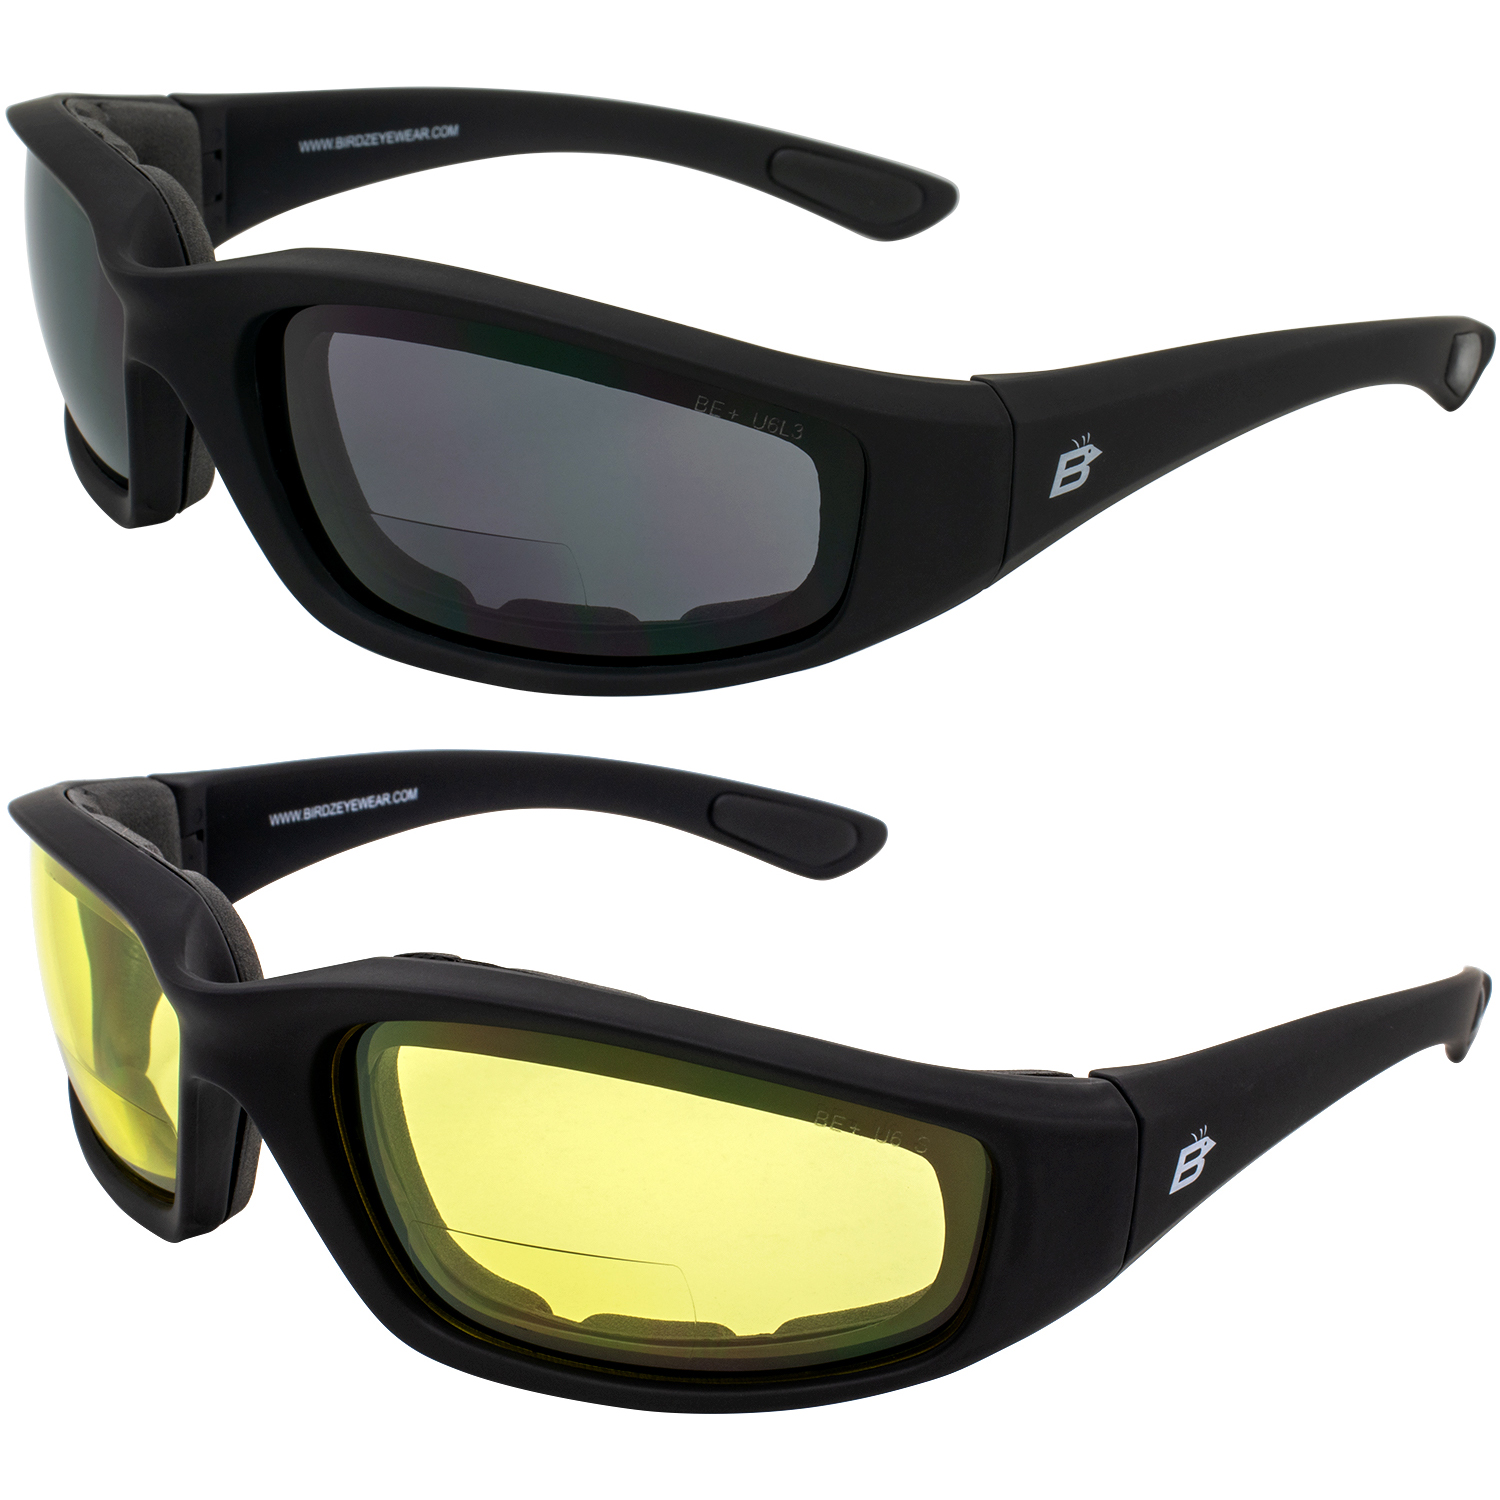 2 Pairs of Birdz Oriole Bifocal Safety Sunglasses Black Frames 2.0X with Smoke & Yellow Lenses - image 1 of 8